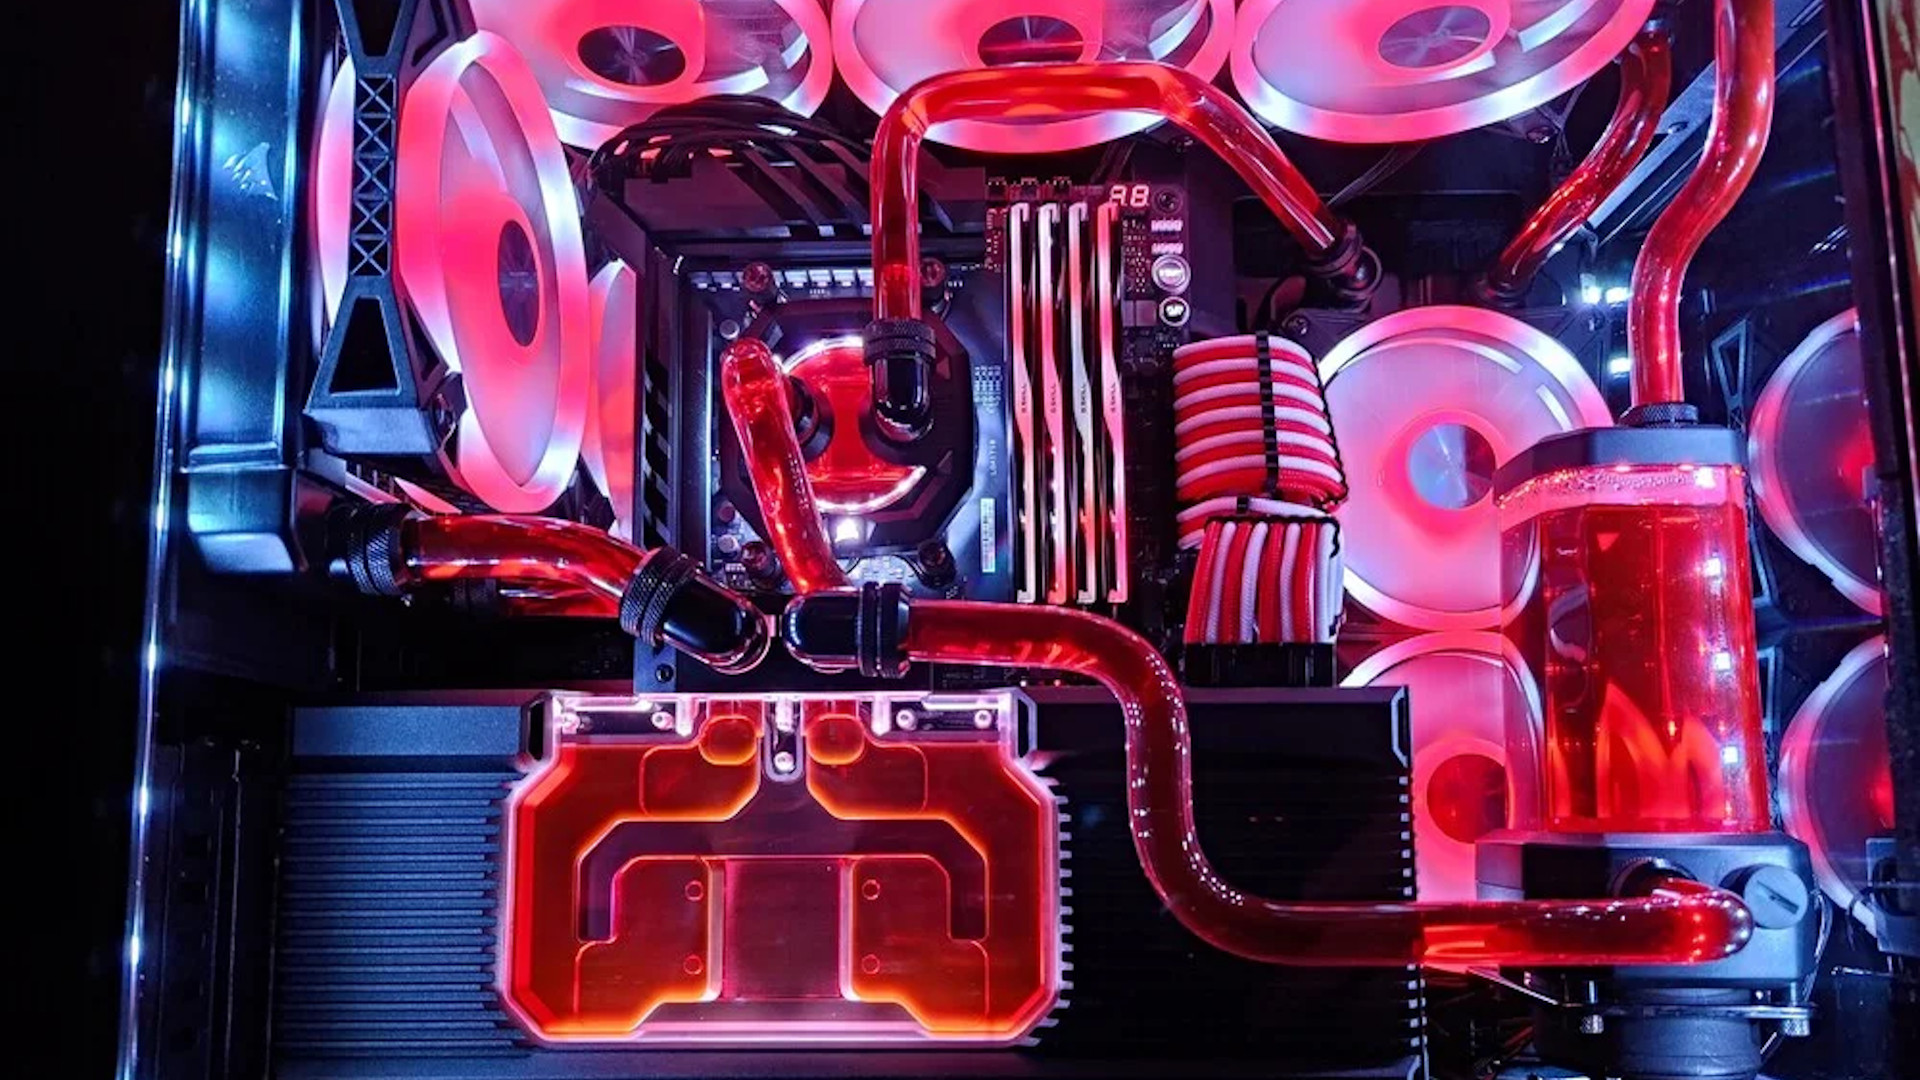 The watercooling inside the Red Queen Resident Evil PC